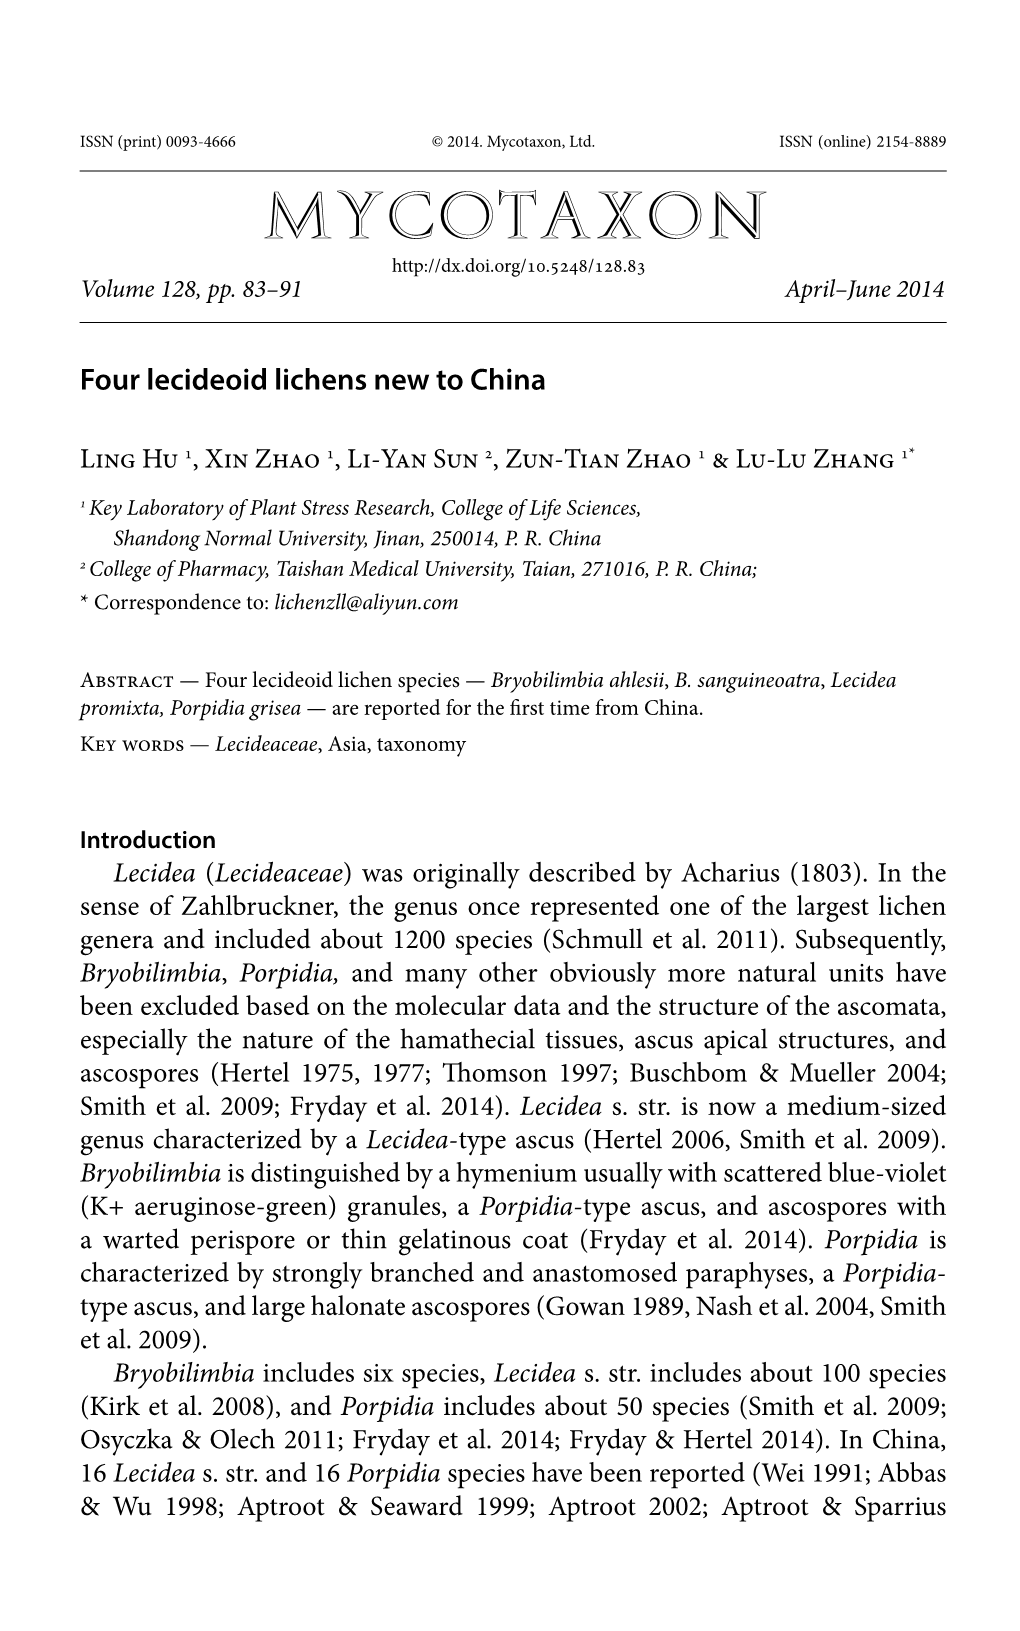 Four Lecideoid Lichens New to China